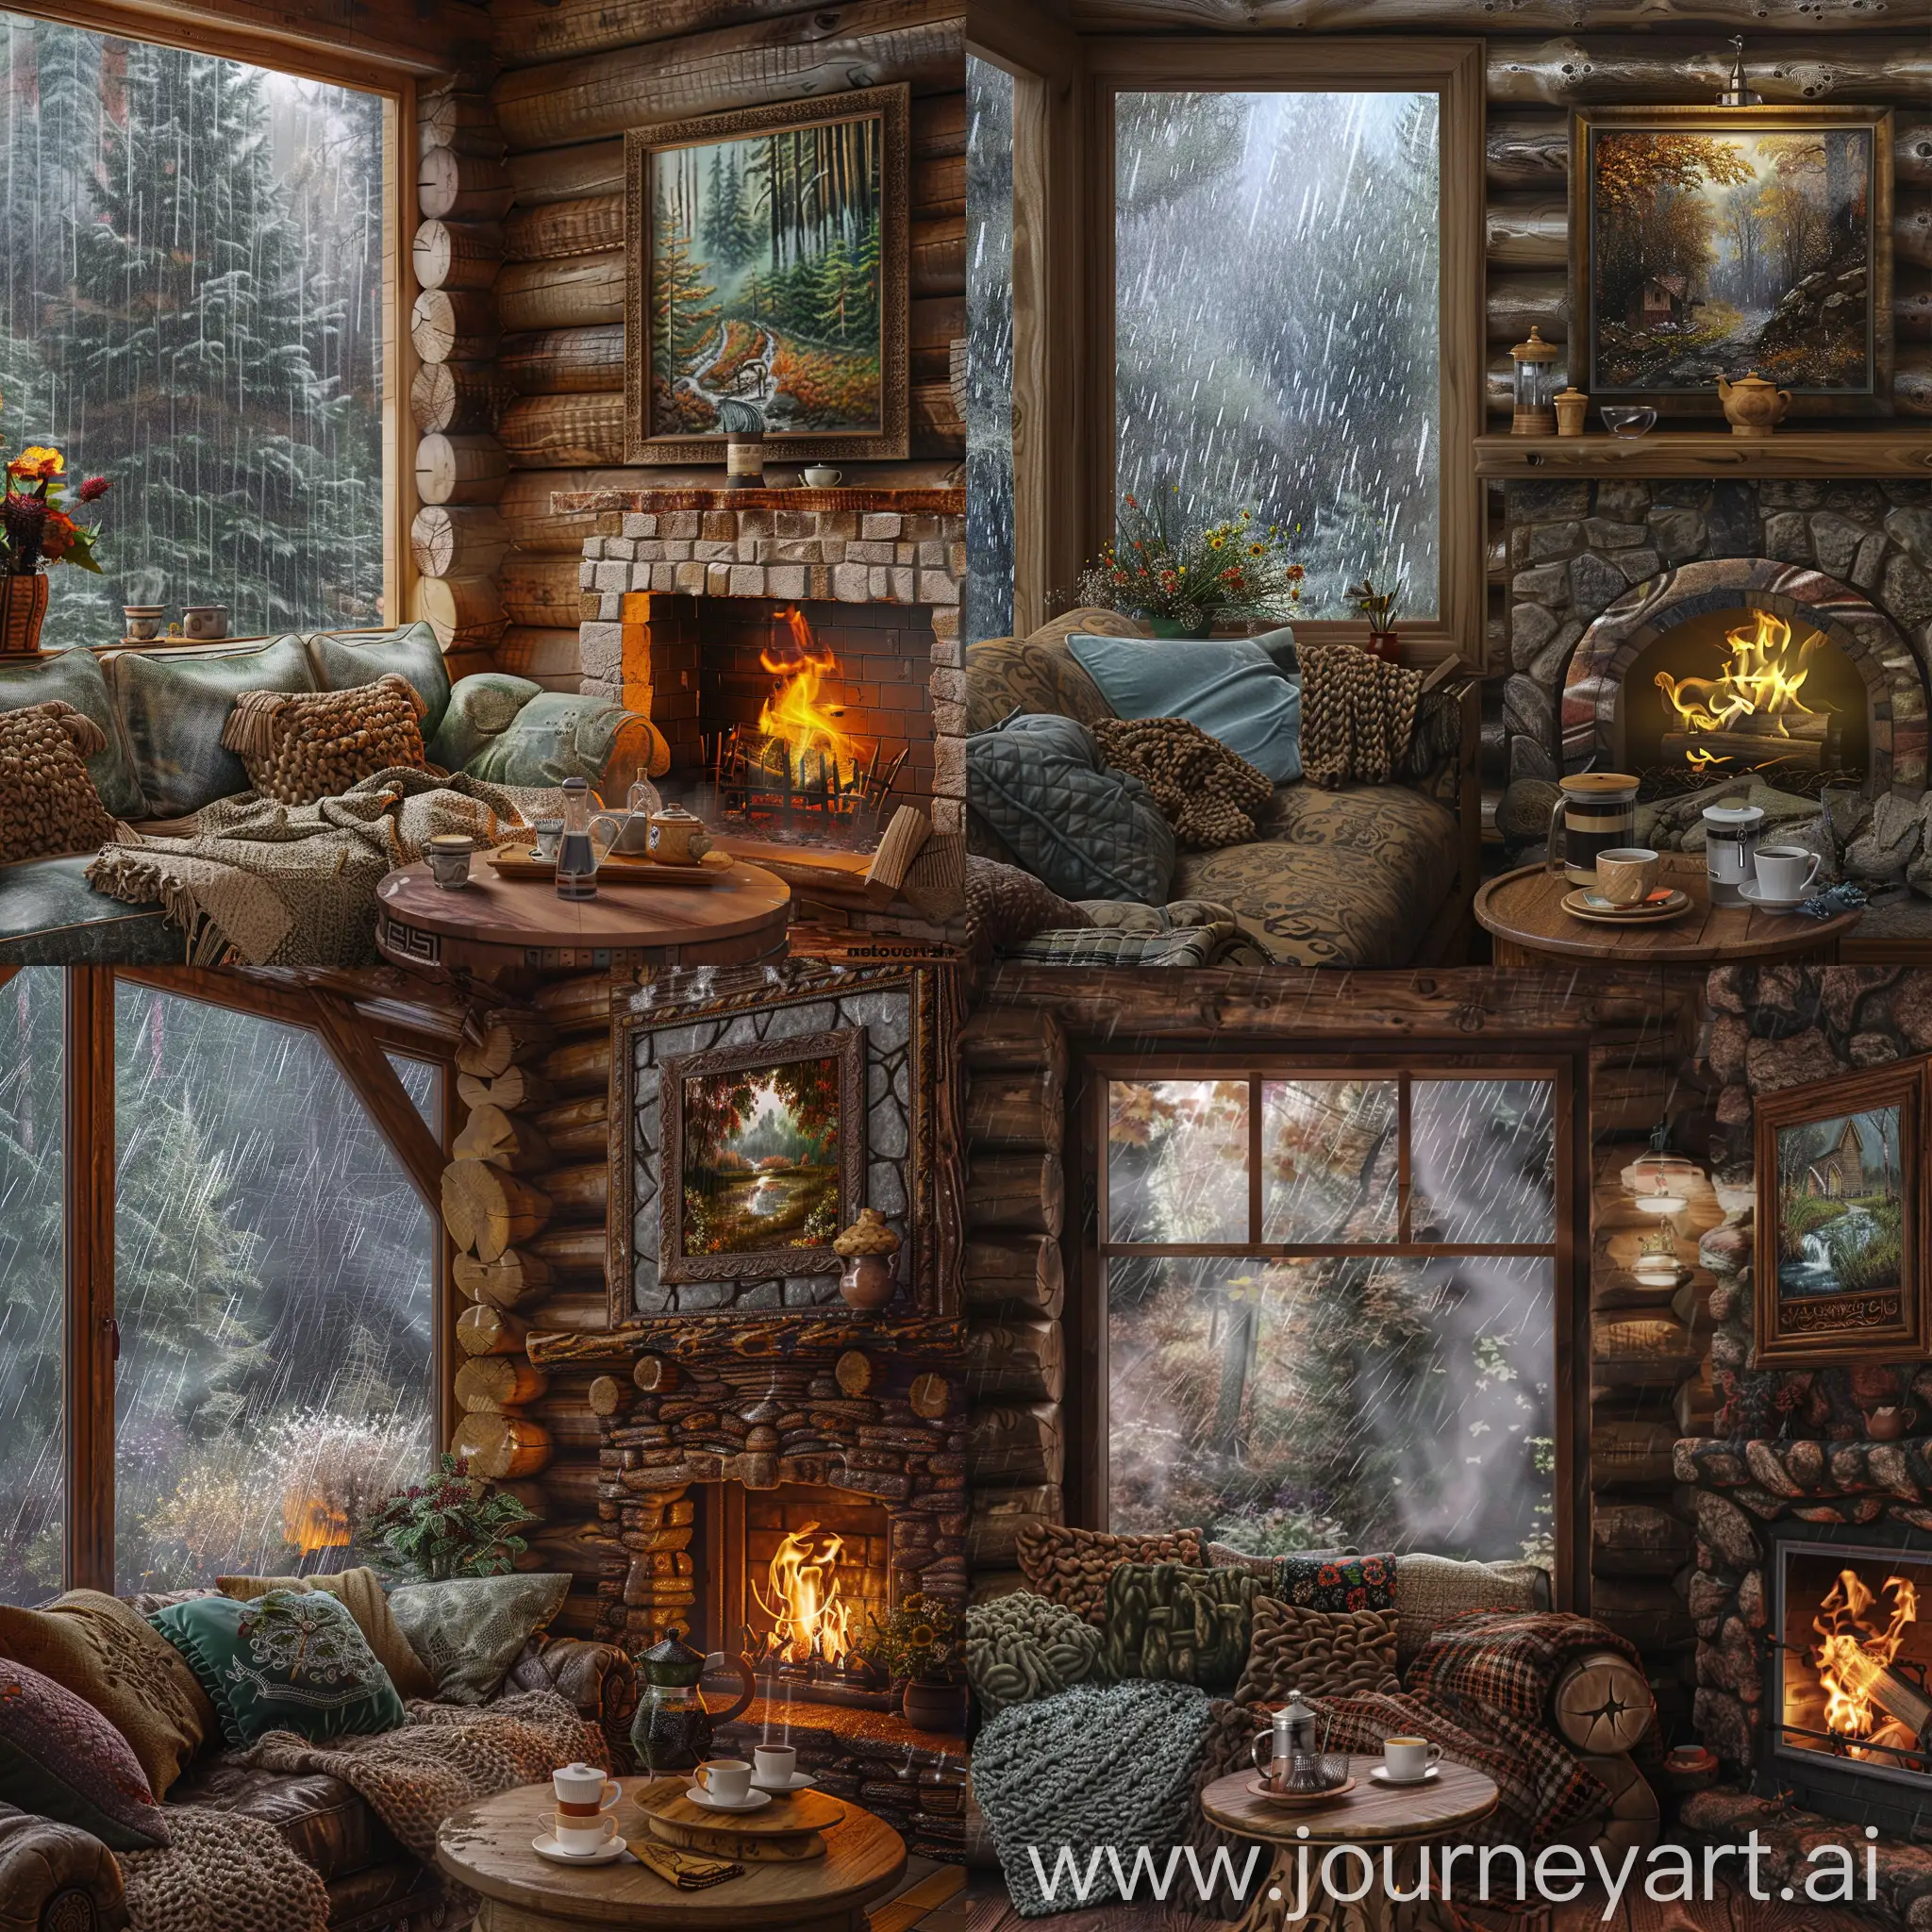 Cozy-Log-Cabin-Interior-with-Fireplace-and-Rainy-Window-View